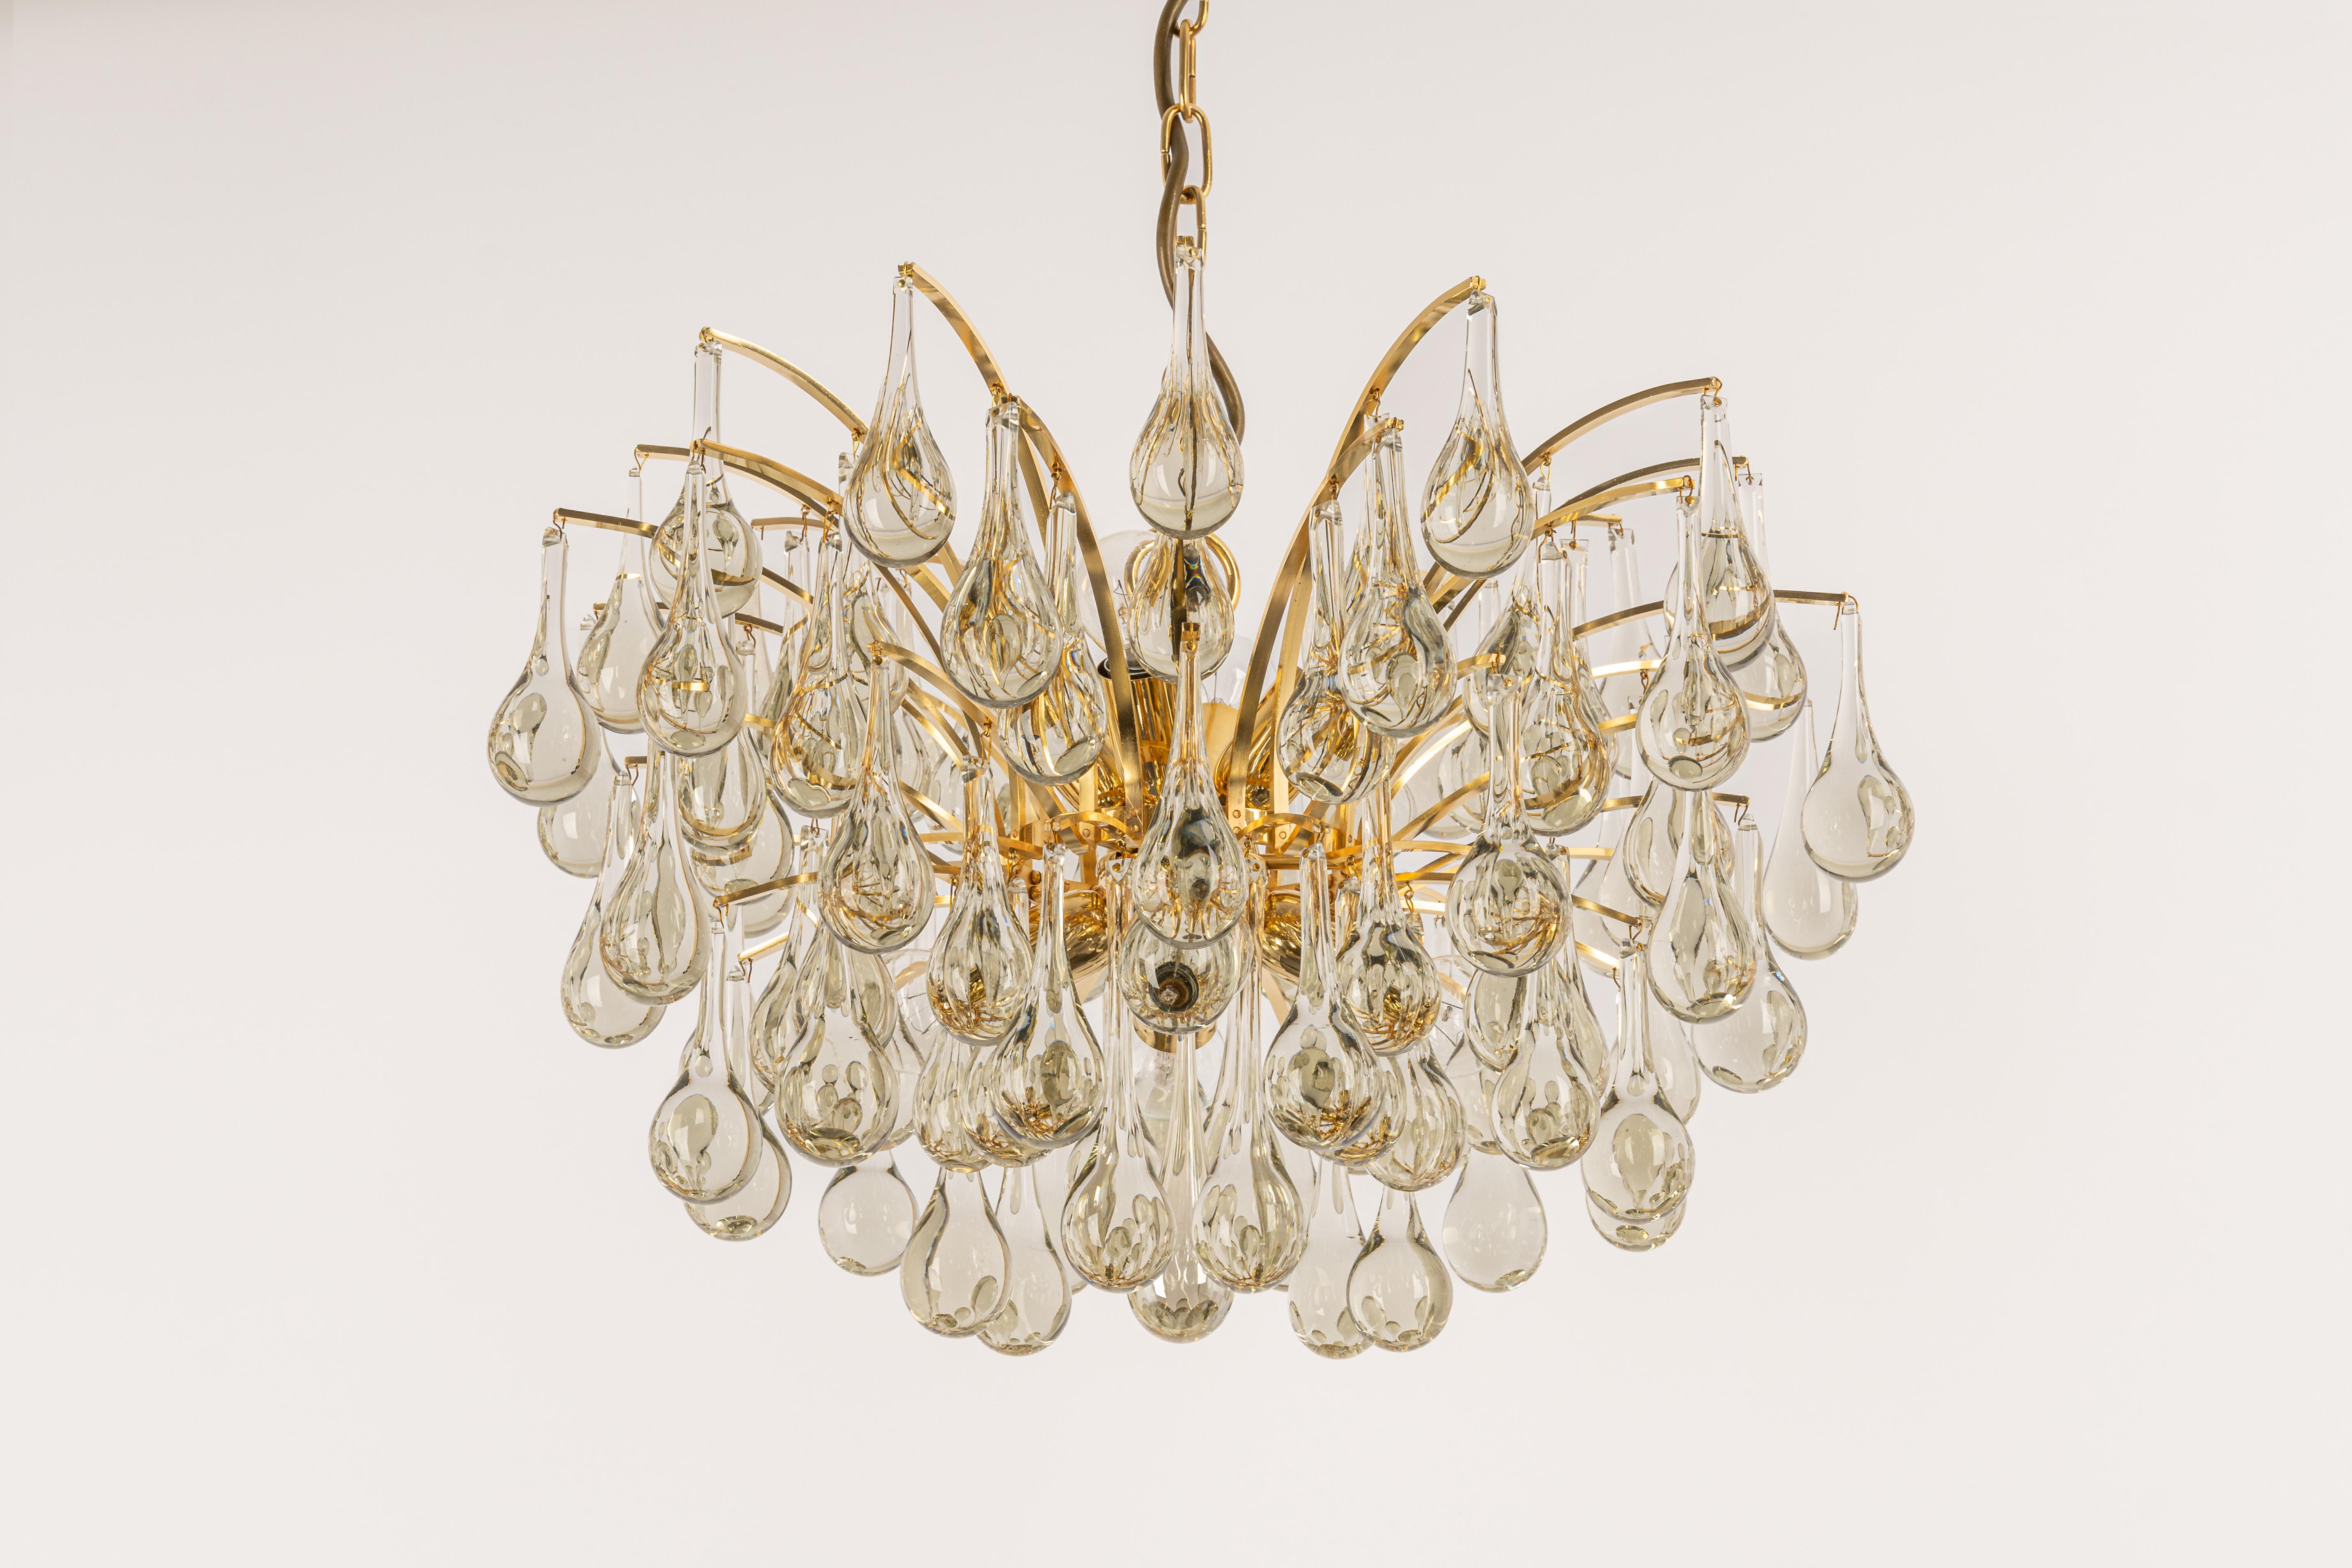 1 of 2 Stunning chandeliers by Christoph Palme, Germany, manufactured in the 1970s. It’s composed of Murano teardrop glass pieces on a gilded brass frame.

High quality and in very good condition. Cleaned, well-wired, and ready to use. 

The